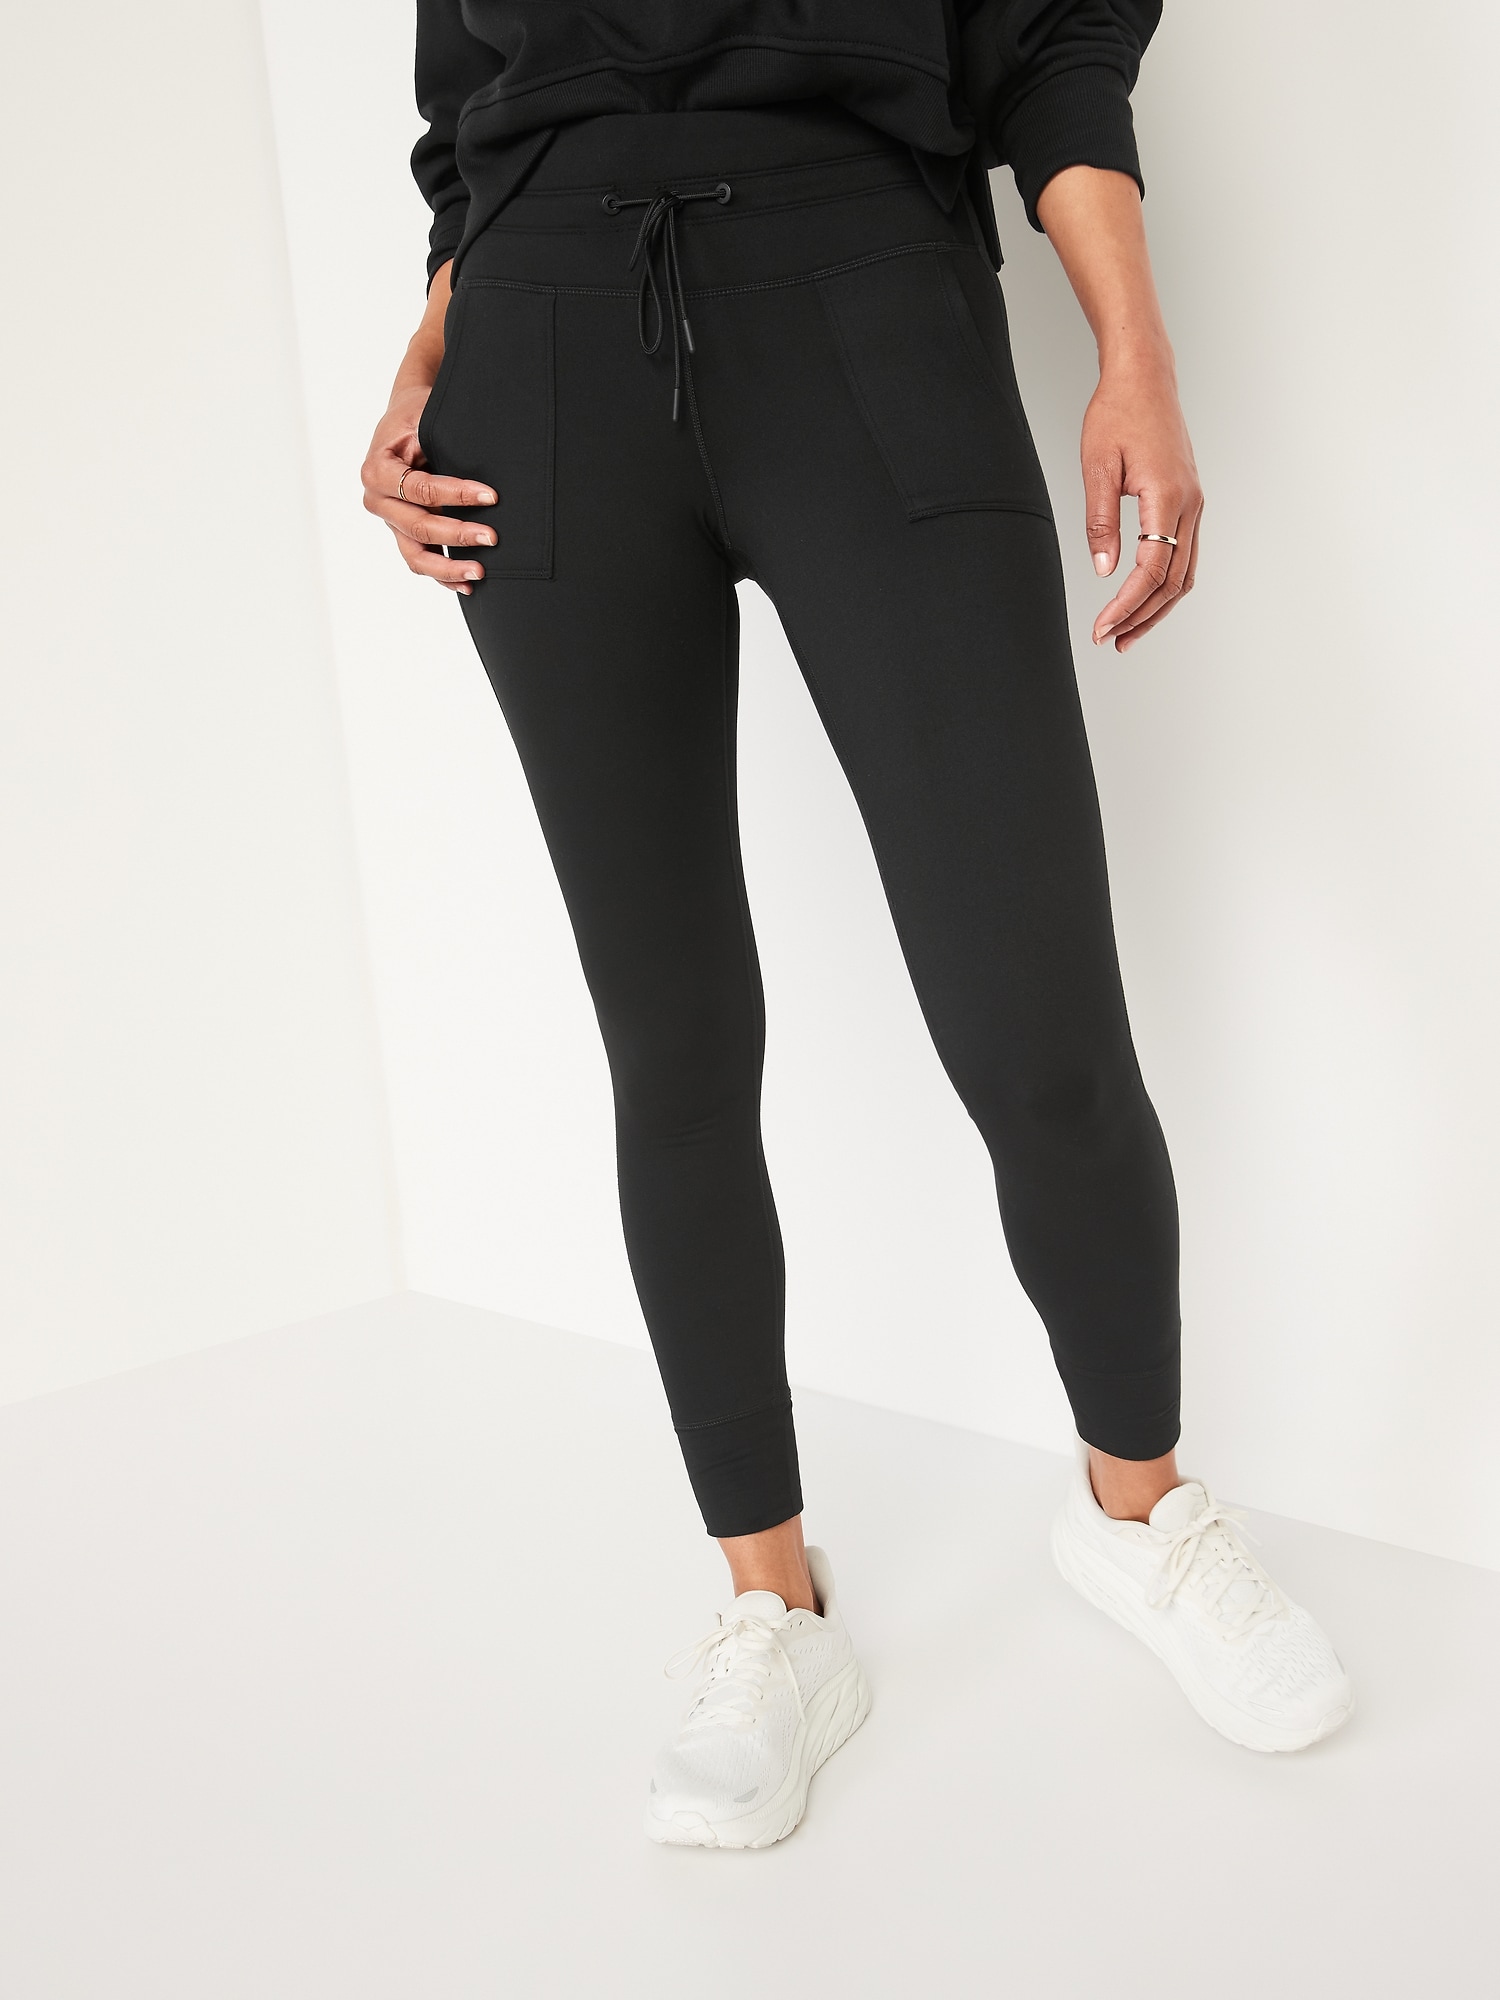 Shopping for Deals - ✨My CozeCore Jogger Leggings are just 💲15 today! They  have the fleece lining so it's definitely cozy and perfect for winter!  Comes in several colors! 🔗 in C O M M E N T S 👇